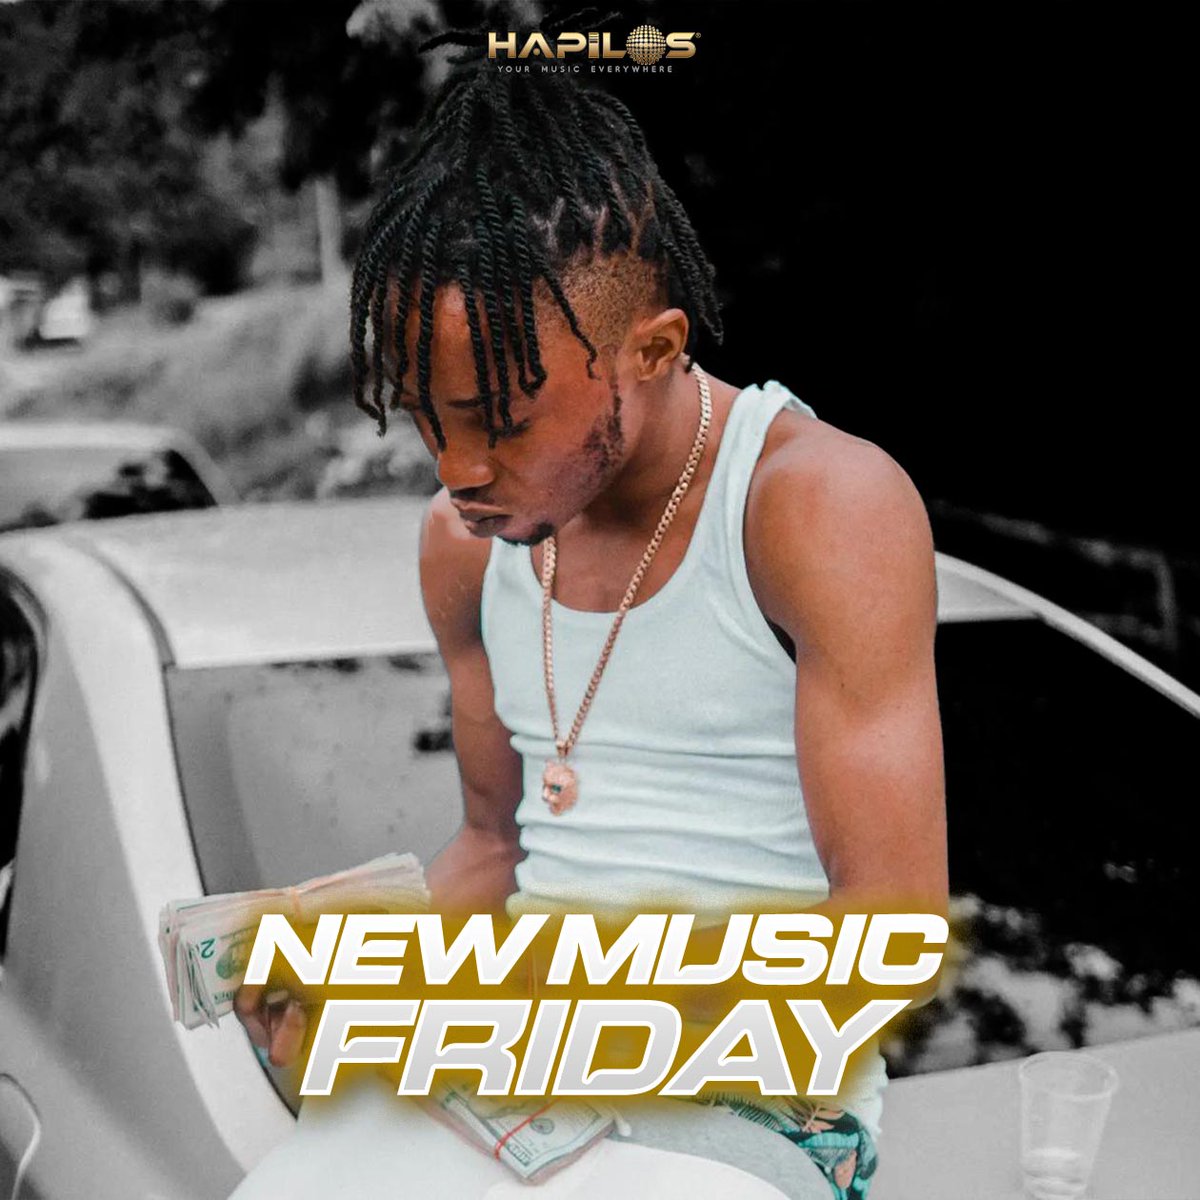 New Music Friday is HERE ❗️
Time to see what’s out 🙌🏾

#DancehallMusic #Dancehall #DancehallArtist #DancehallDaily #DancehallReggae #ReggaeDancehall #NewMusicFriday #NewMusicFridays #NewMusicRelease